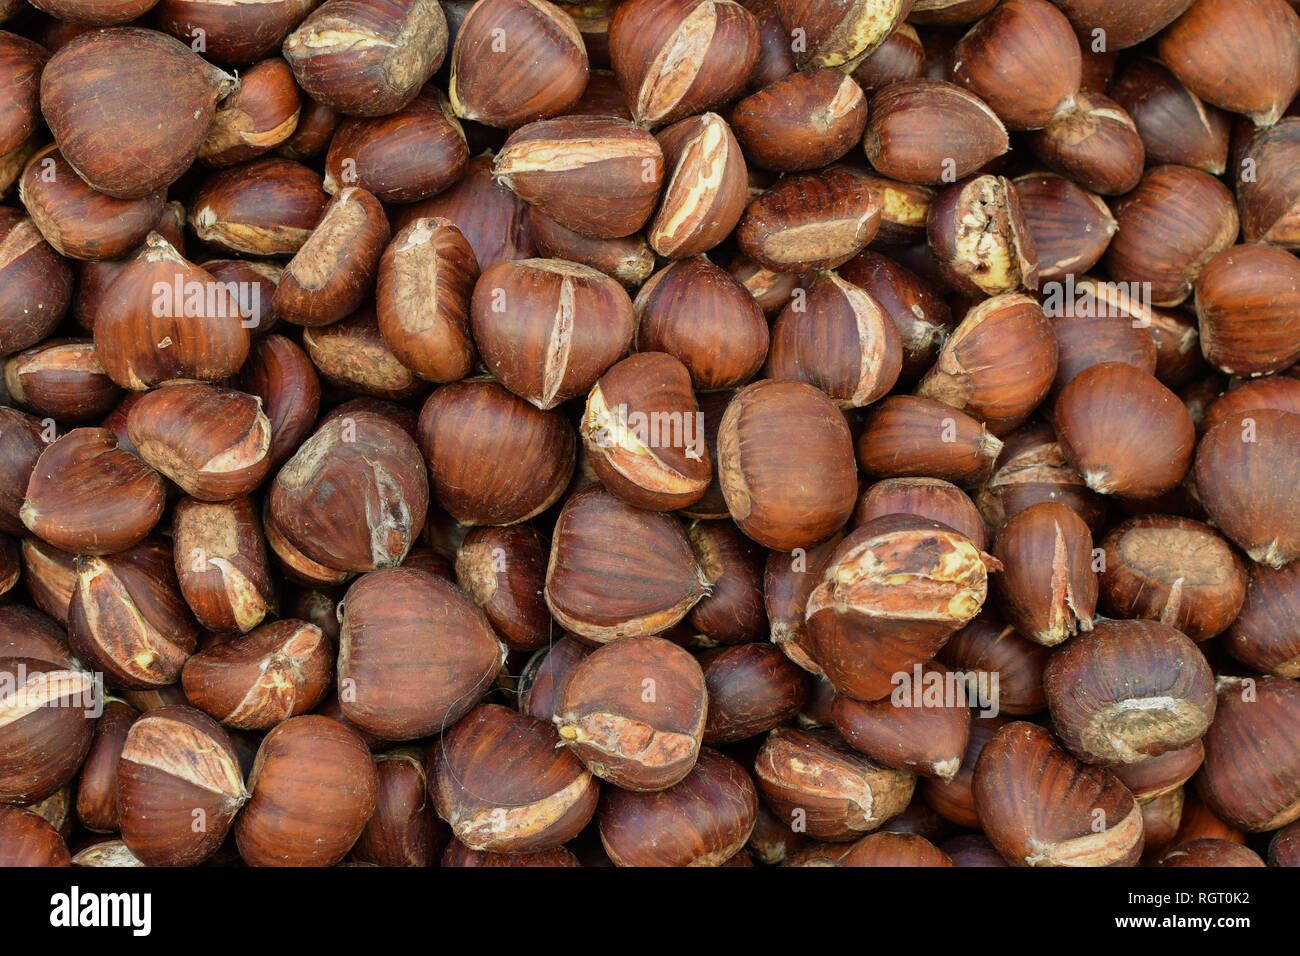 Fresh chestnuts edible culinary nuts snack food background. Stock Photo